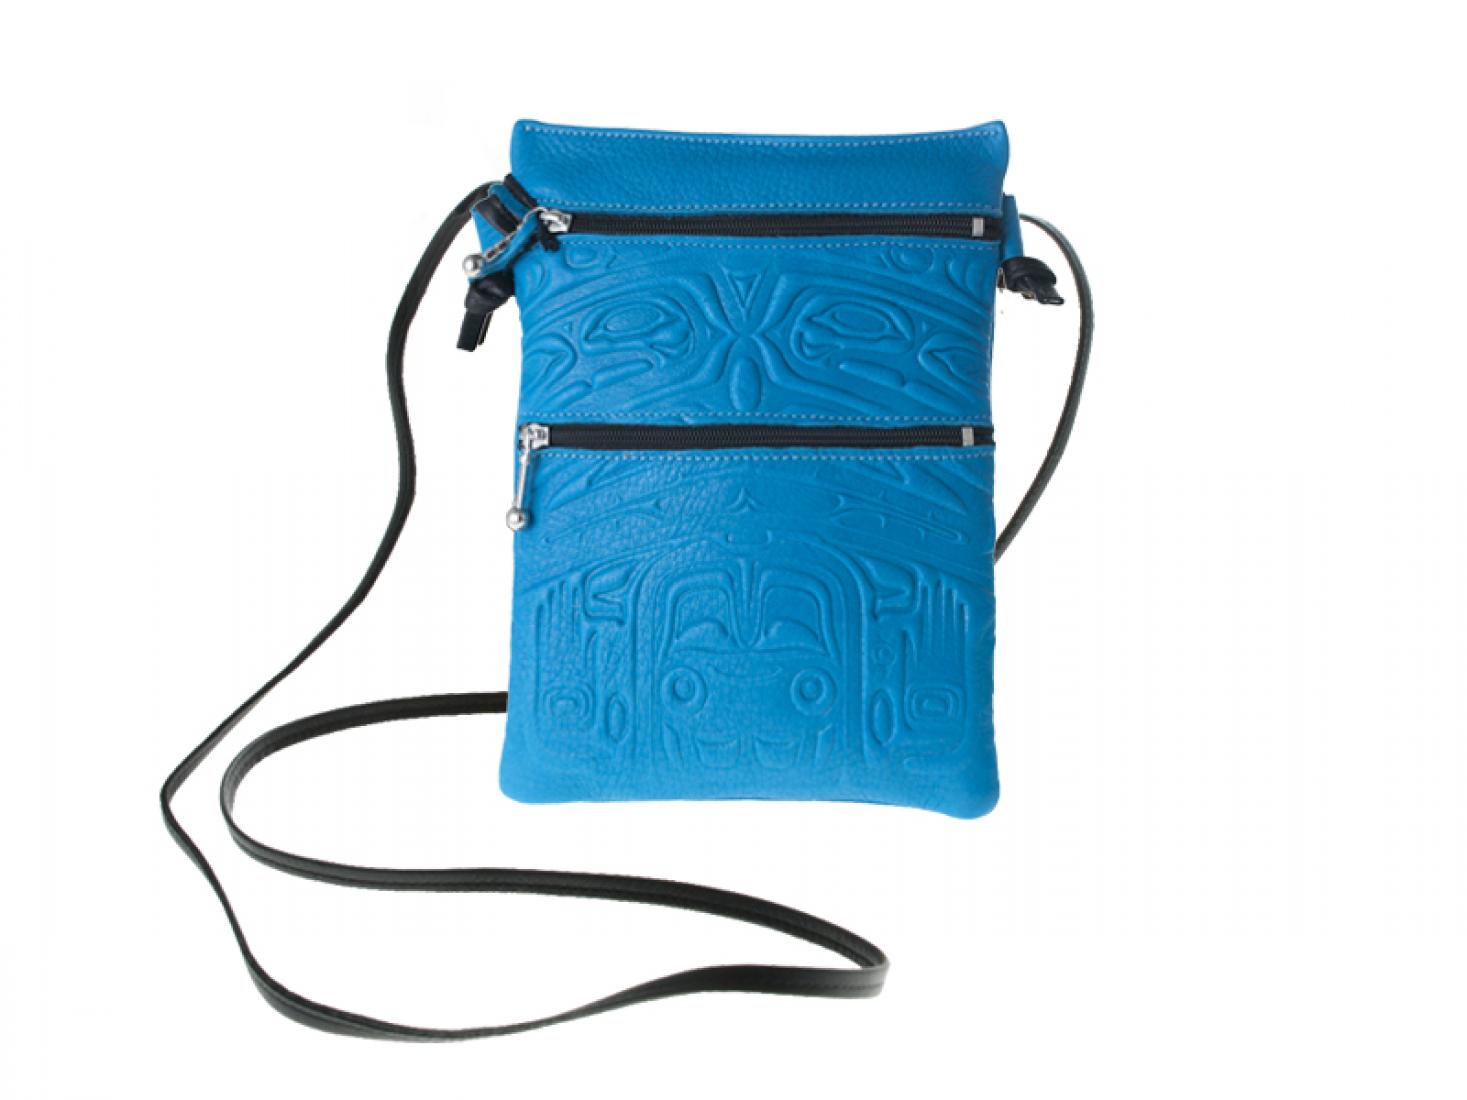 Embossed Leather Passport Pouch with Bear Box Design by Clifton Fred, Turquoise, Deer Skin